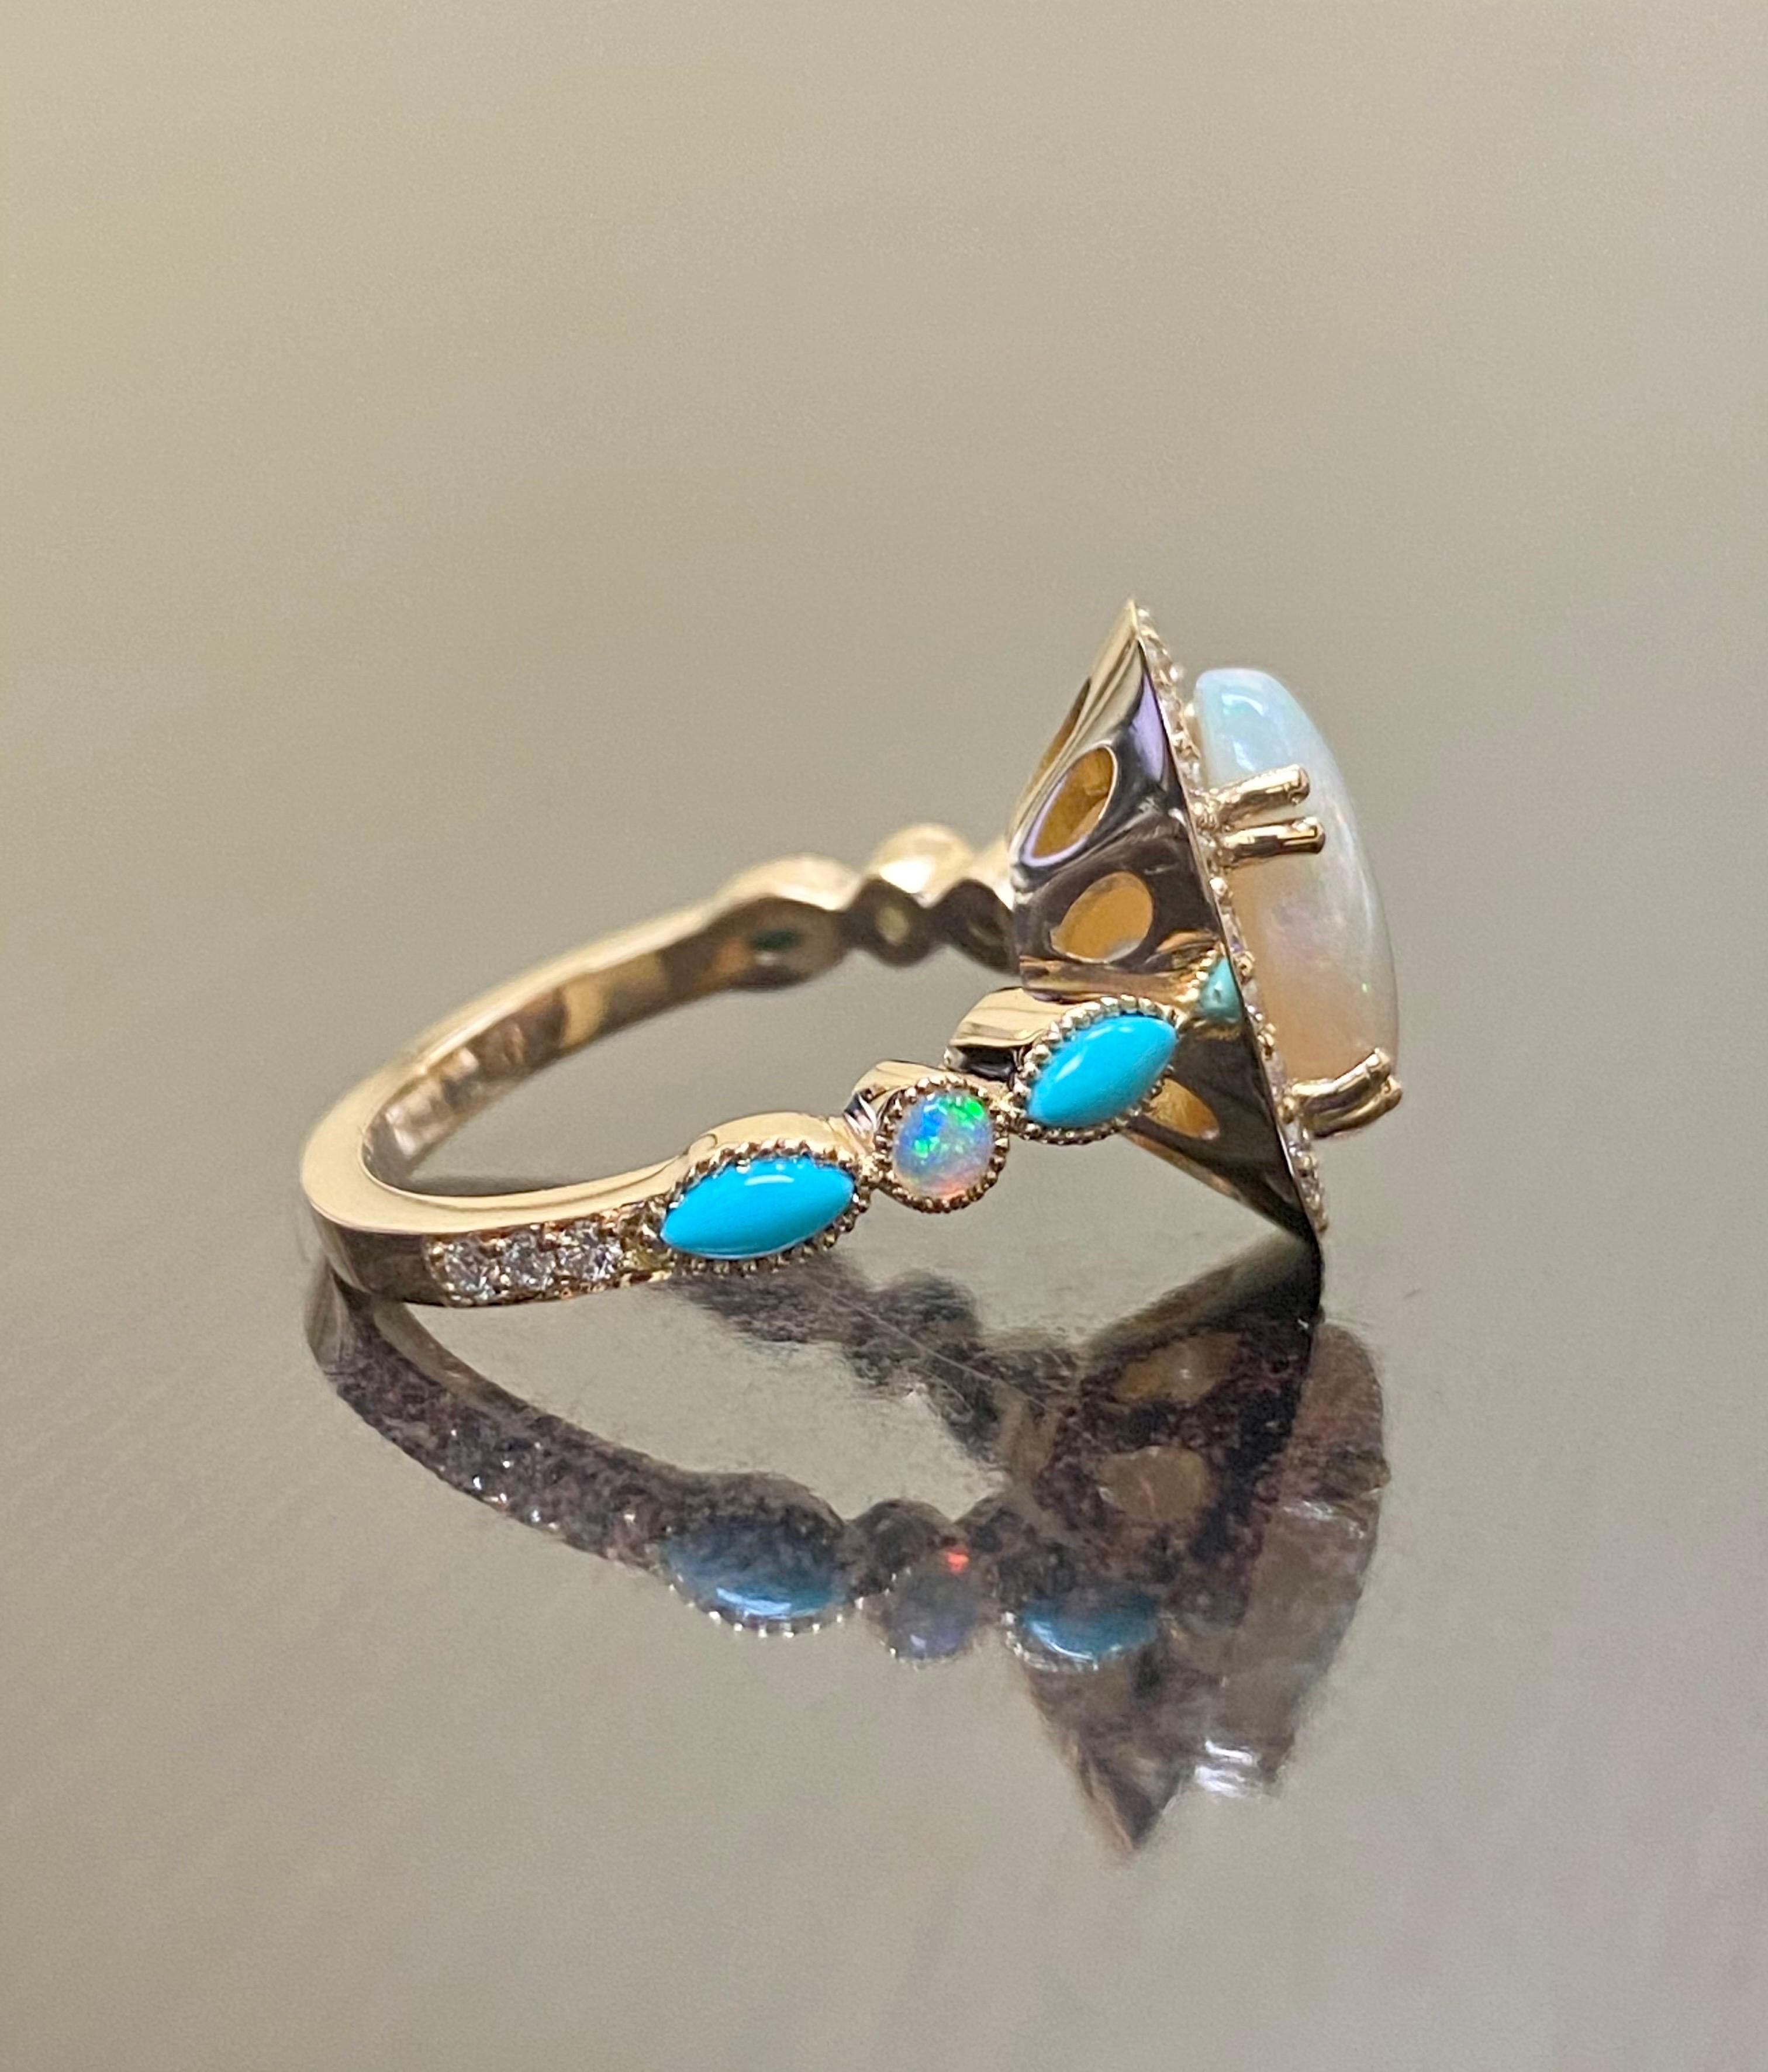 DeKara Designs Collection

Metal- 18K Rose Gold, .750.

Stones- Center Features an Oval Fiery Australian Opal Cabochon Cut 12 x 10 MM 2.20-2.50 Carats, Four Marquise Turquoise, Two Round Opals, 30 Round Diamonds F-G Color VS2 Clarity, 0.40